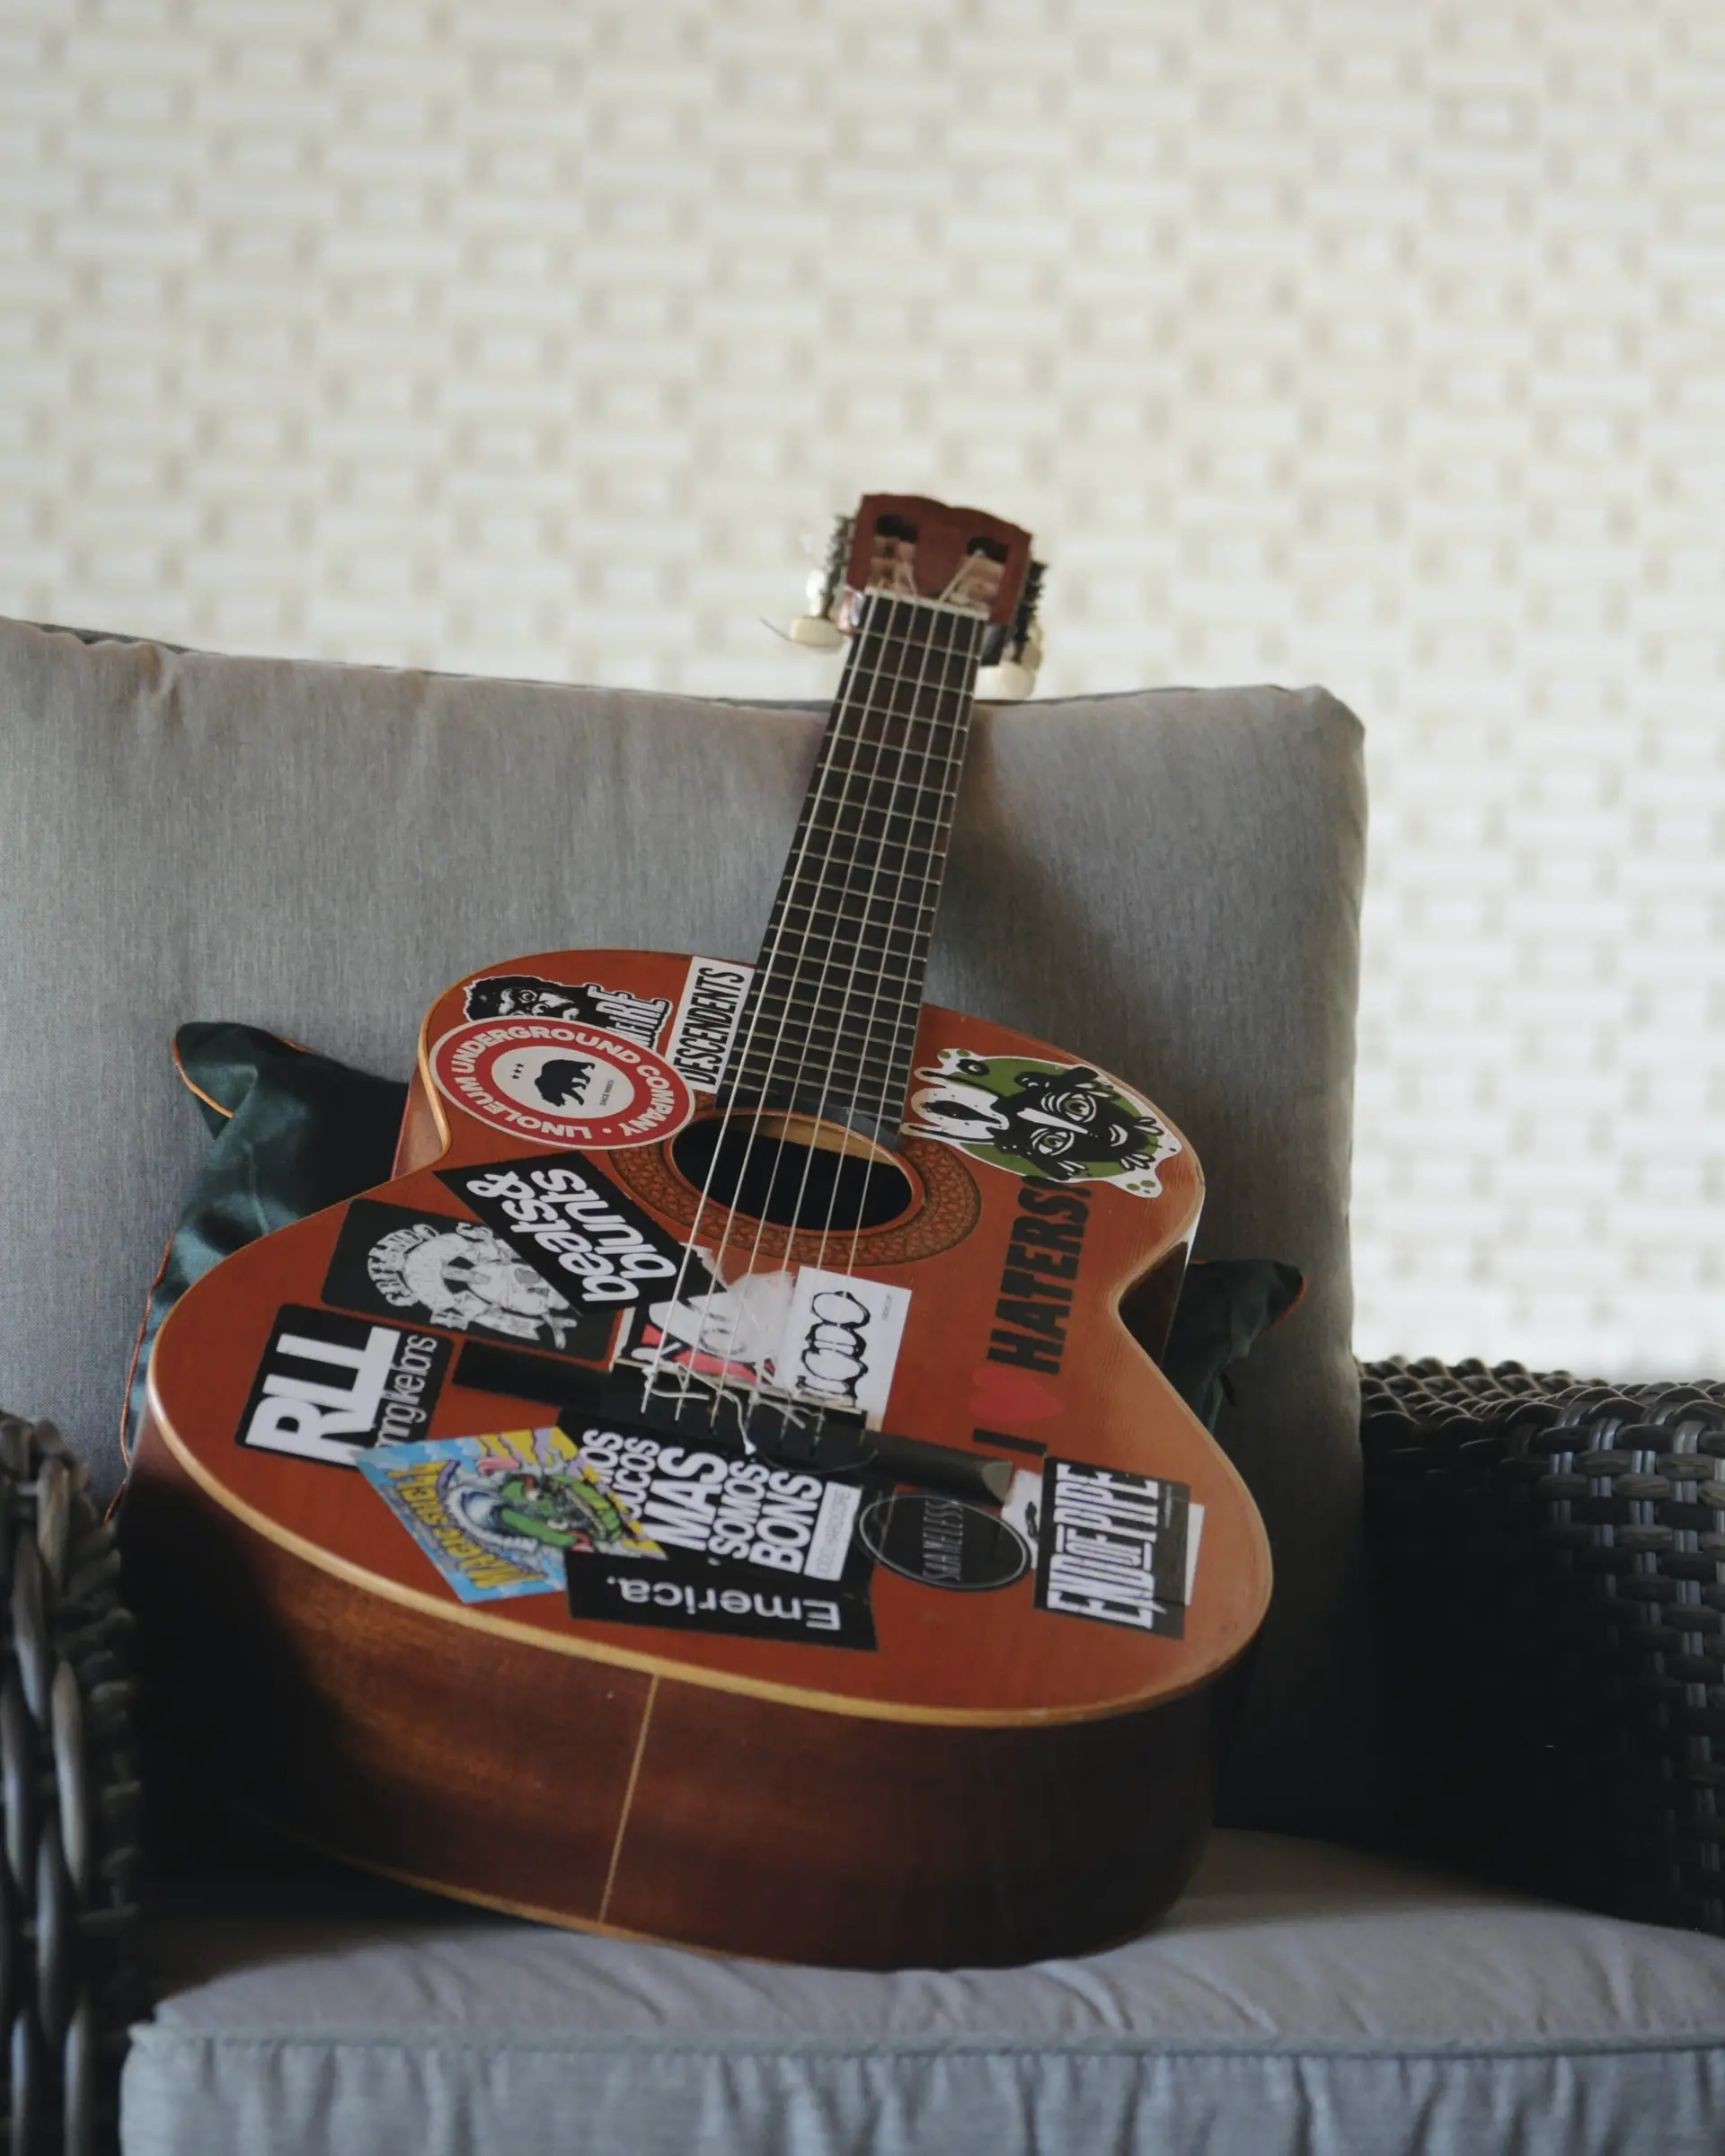 Stickers On Guitar: Safe Place To Put & The Impact On Sound